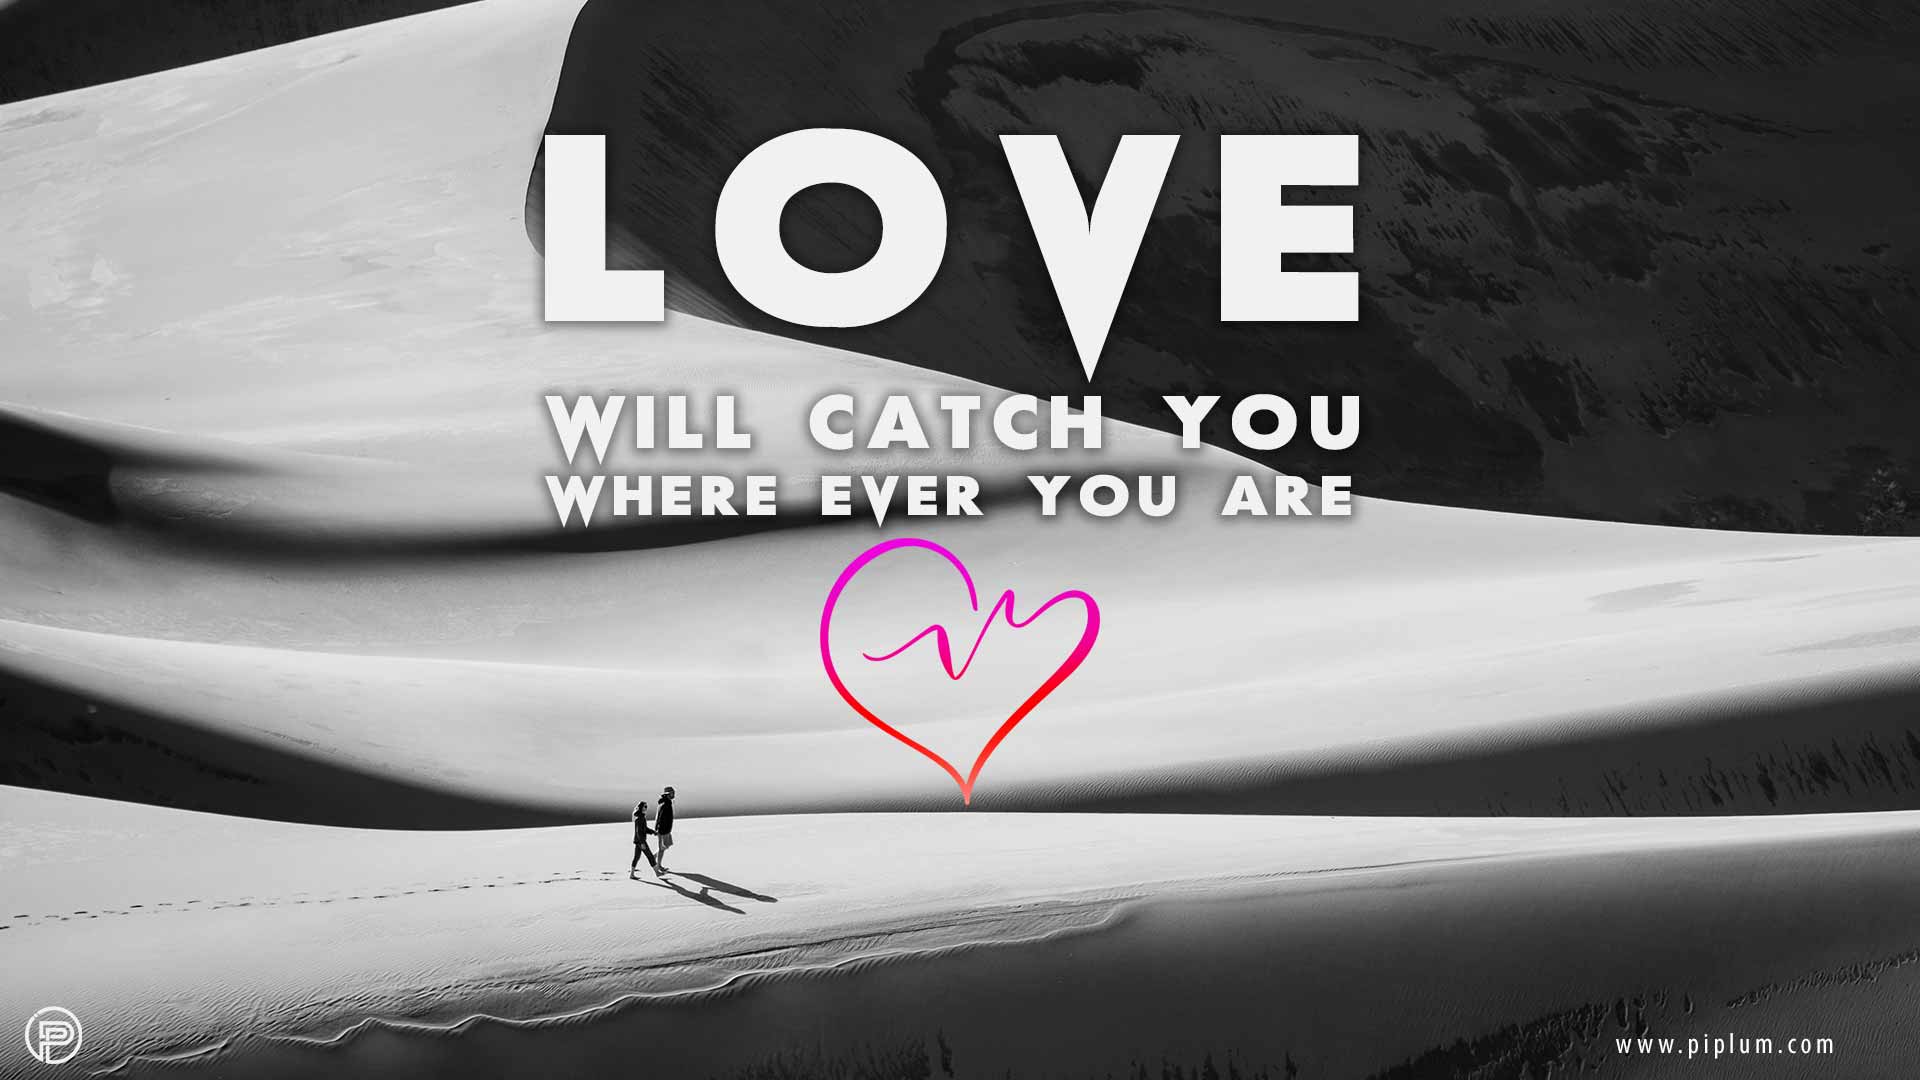 couple-desert-love-will-catch-you-where-ever-you-are-quote